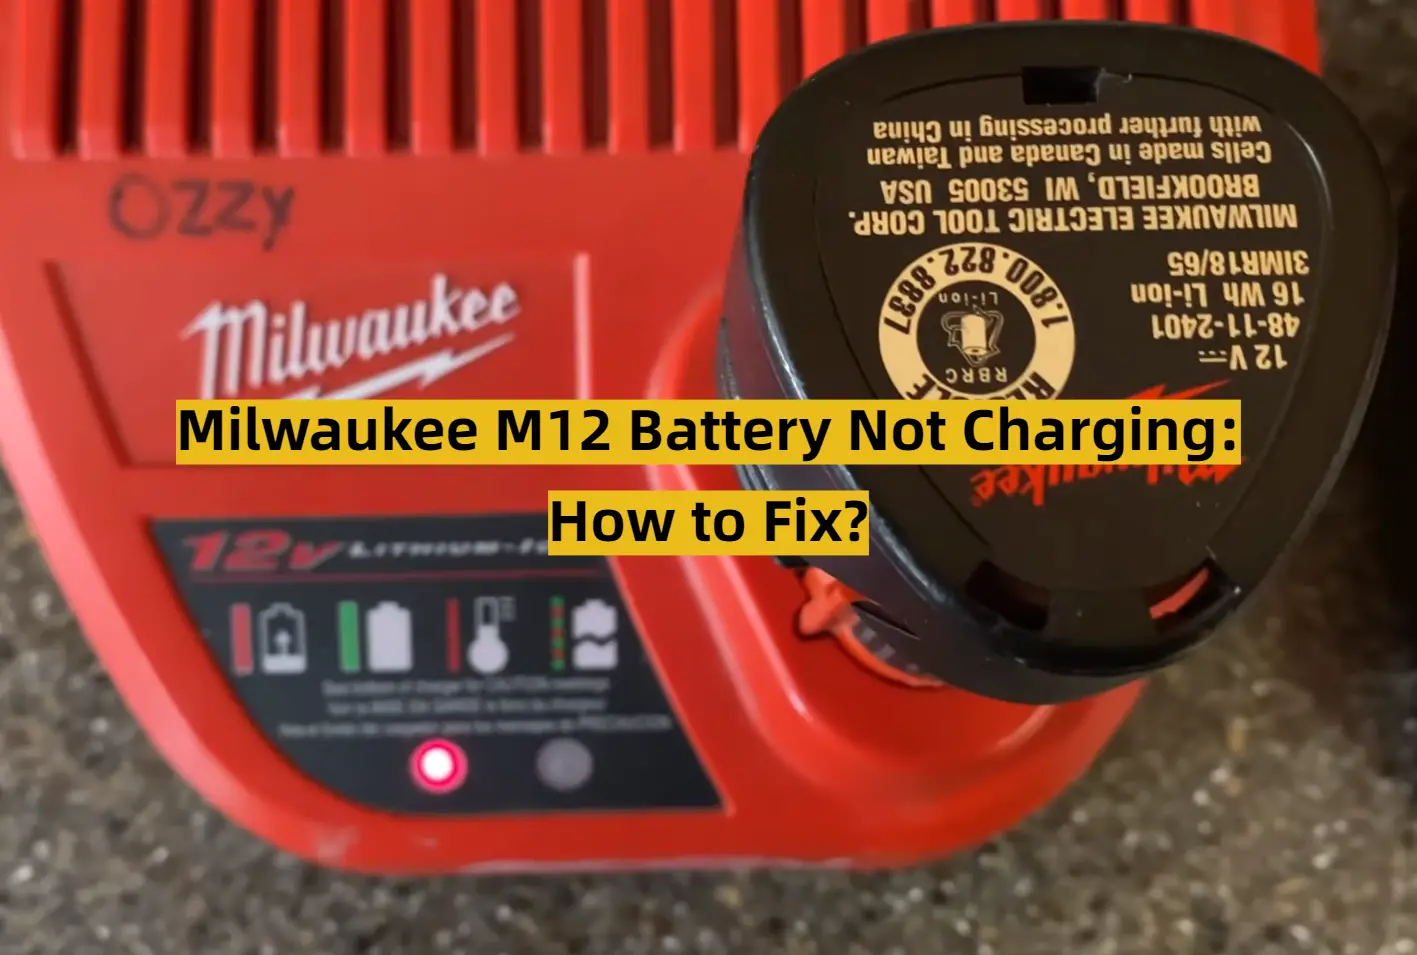 Milwaukee M12 Battery Not Charging: How to Fix?